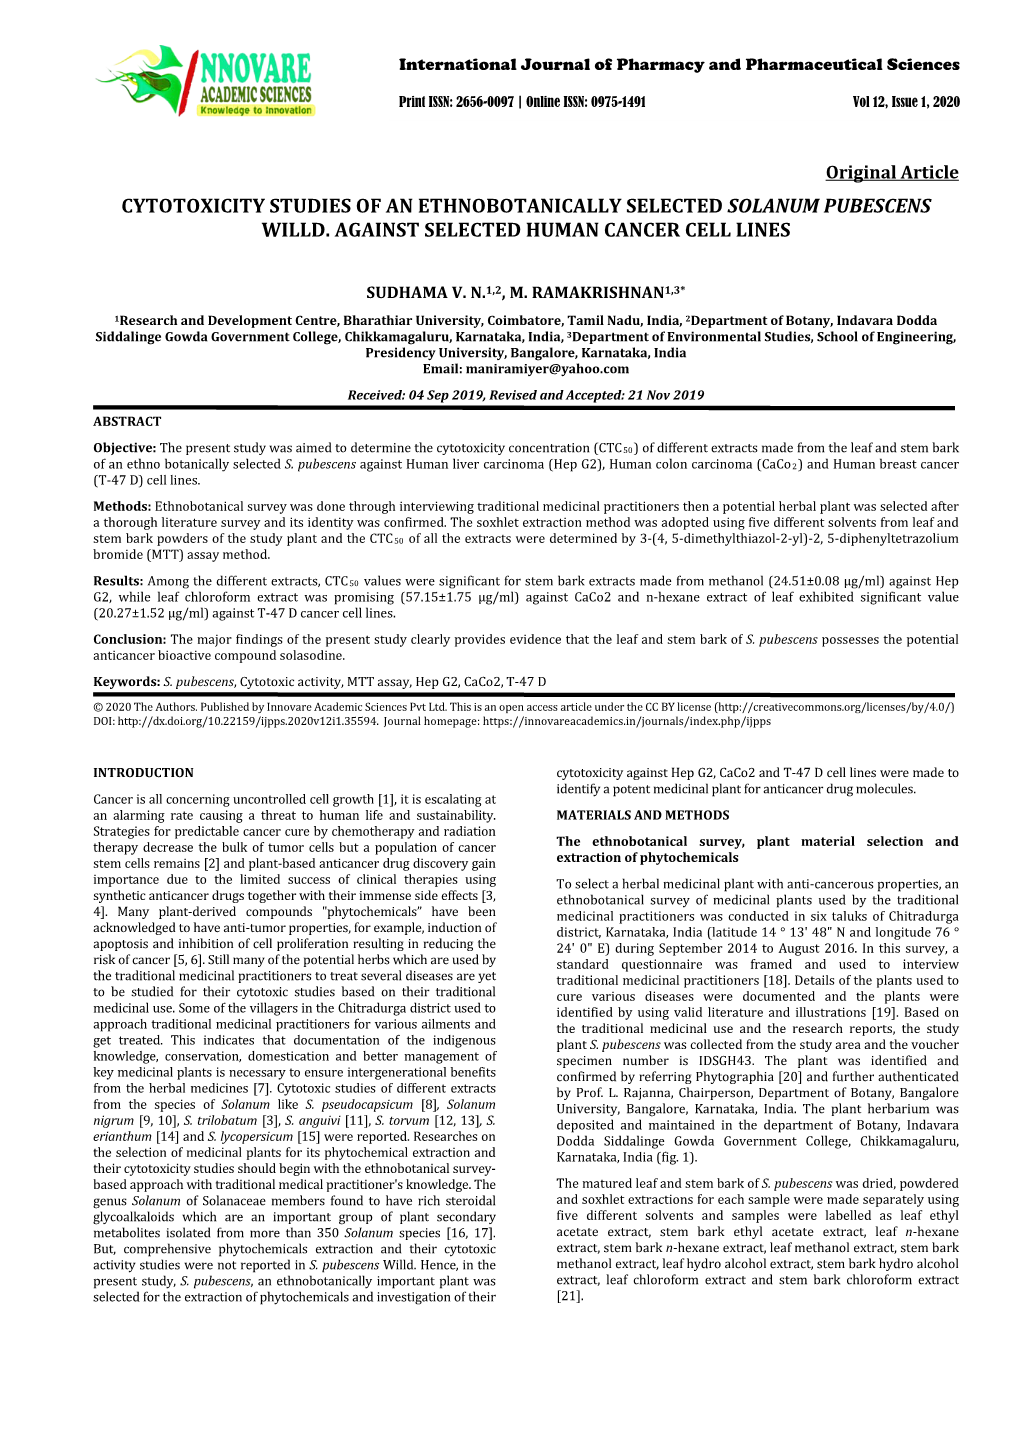 Cytotoxicity Studies of an Ethnobotanically Selected Solanum Pubescens Willd